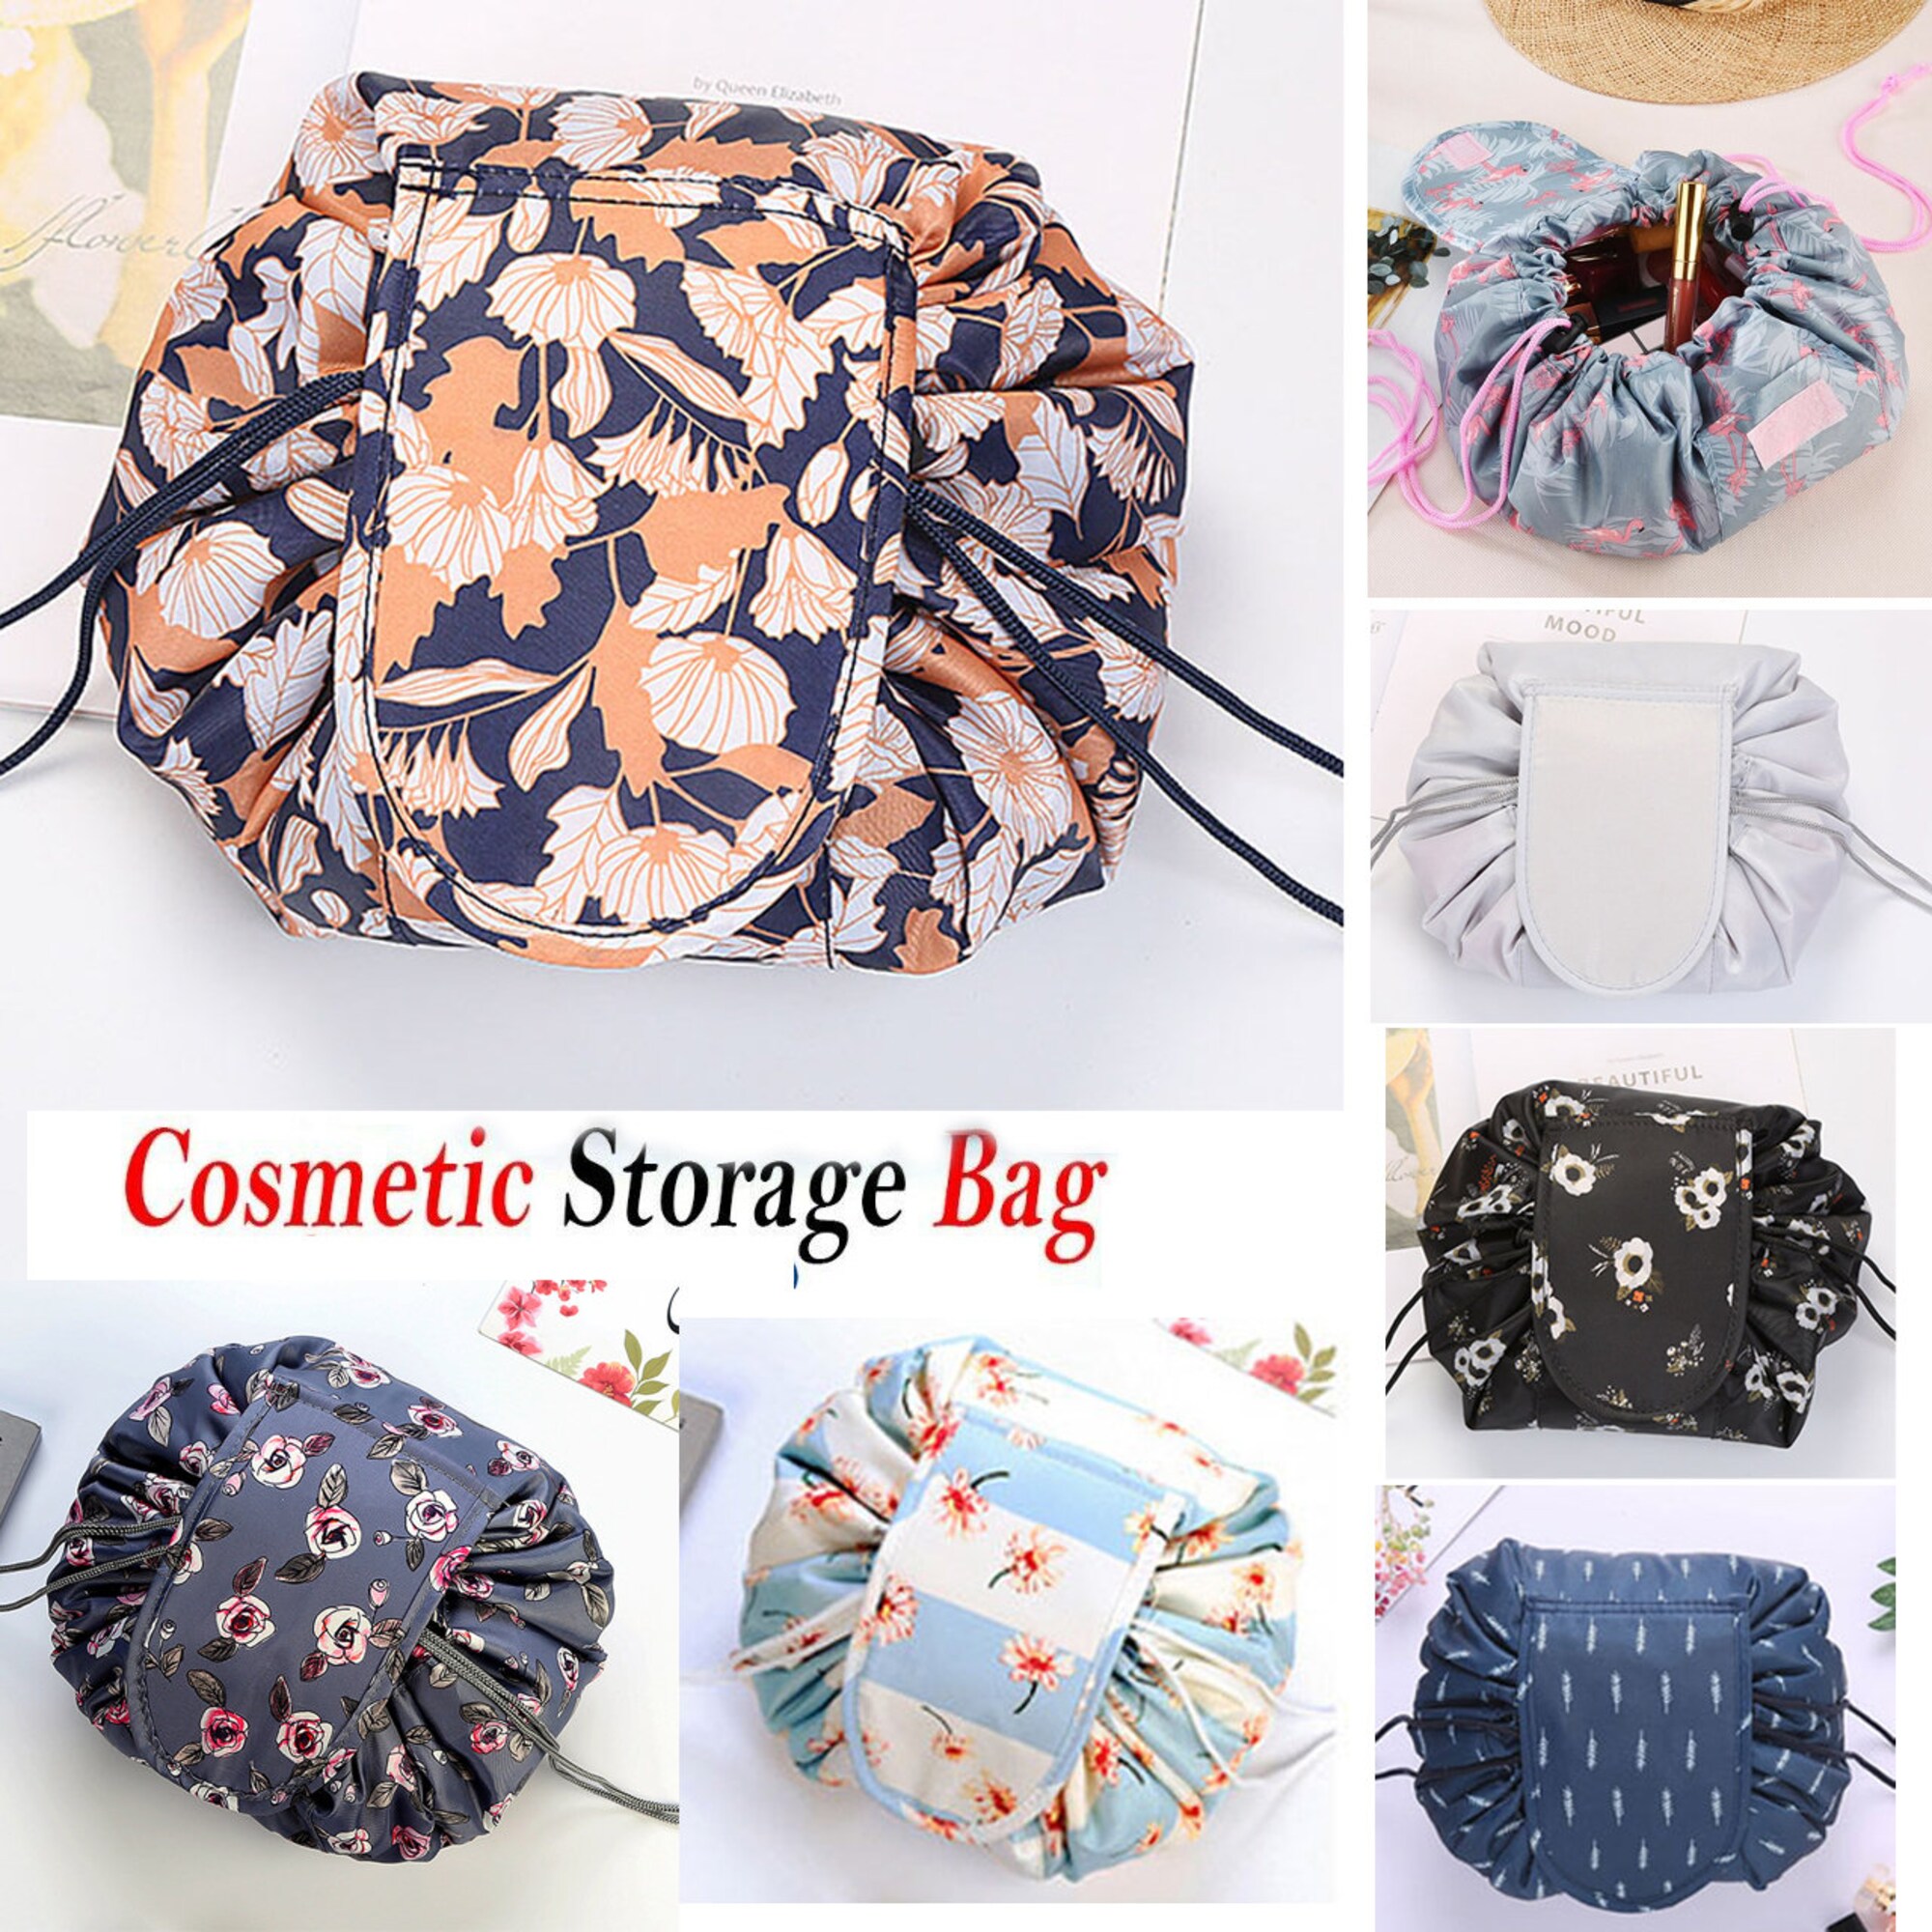 Portable Travel Makeup Cosmetic Bags Organiser Multi-function Case Toiletry Bags for Women